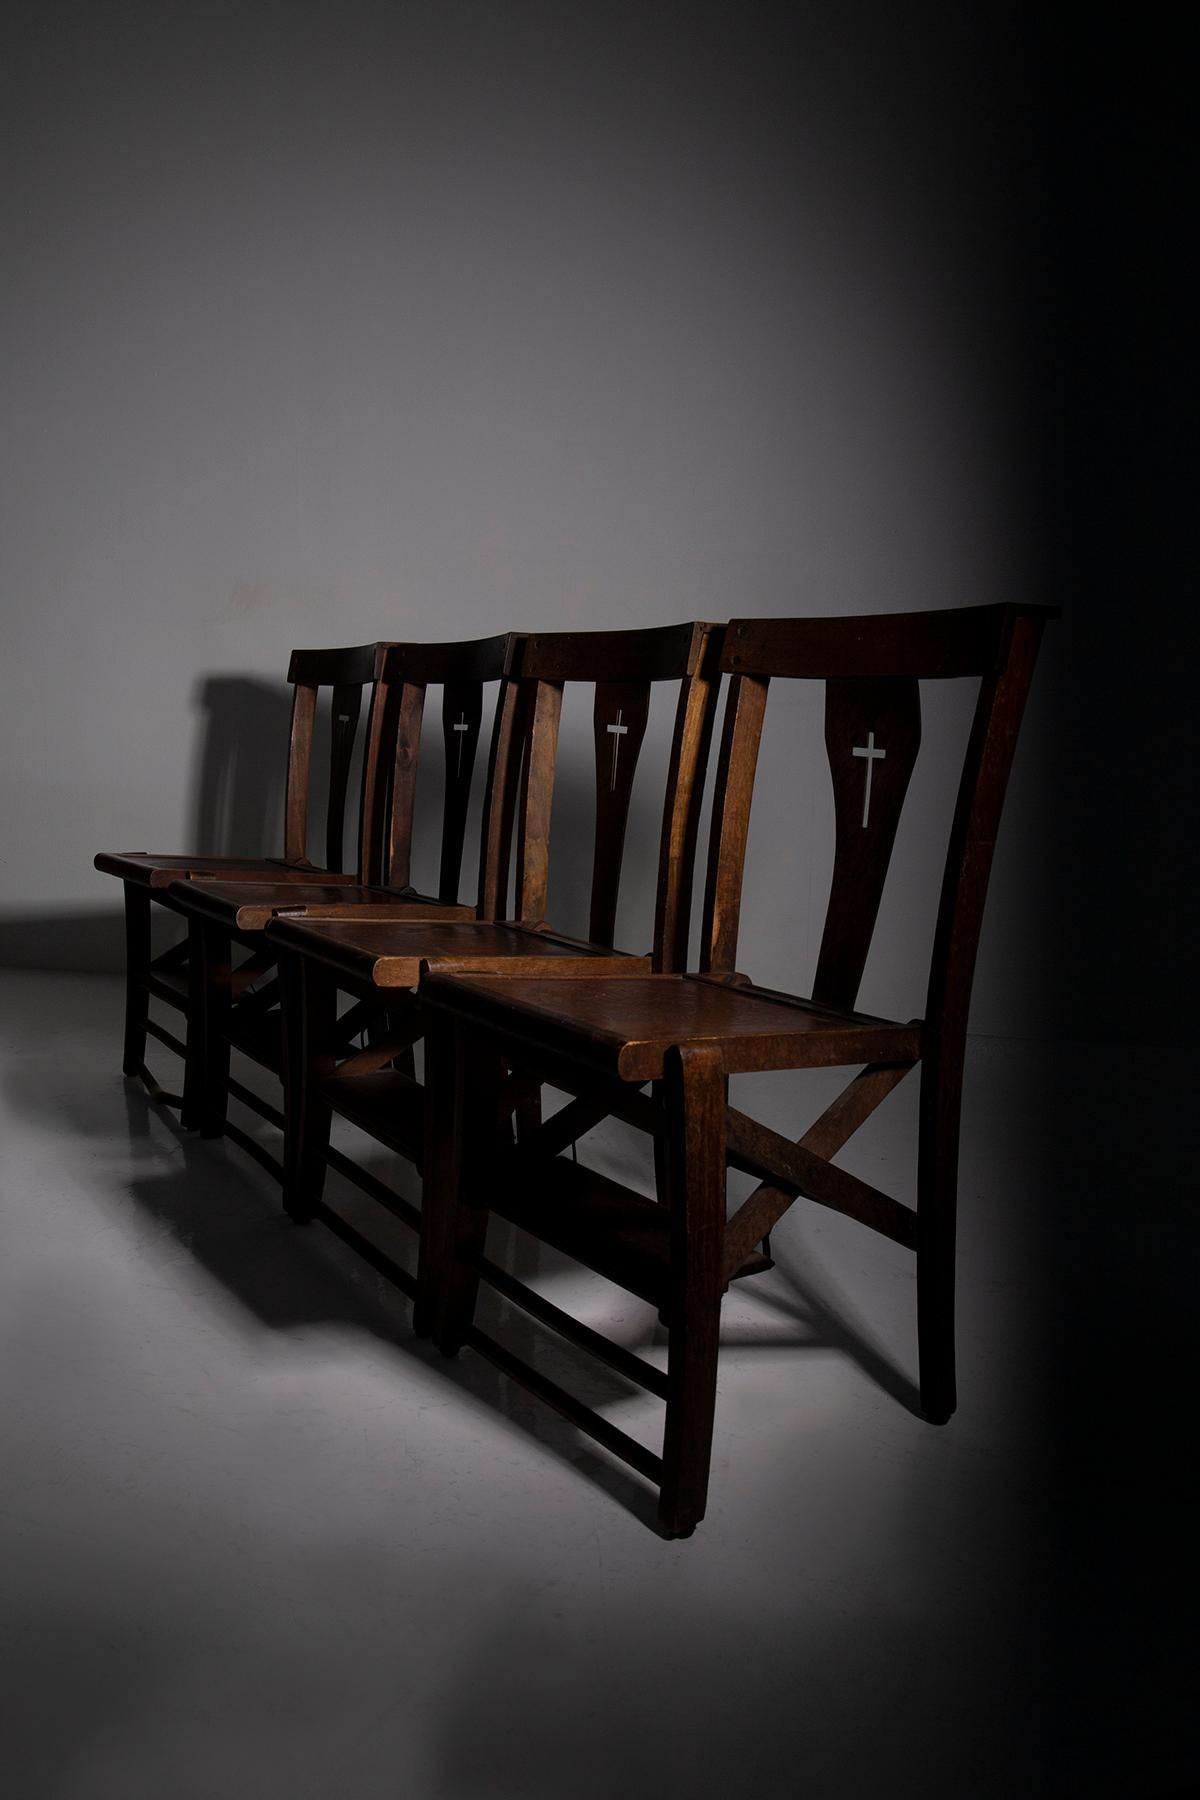 Imagine stepping into a room where time seems to stand still, and a sense of reverence fills the air. In this sacred space, four vintage Italian ecclesiastical chairs from the 1940s await, each one a testament to the intersection of craftsmanship